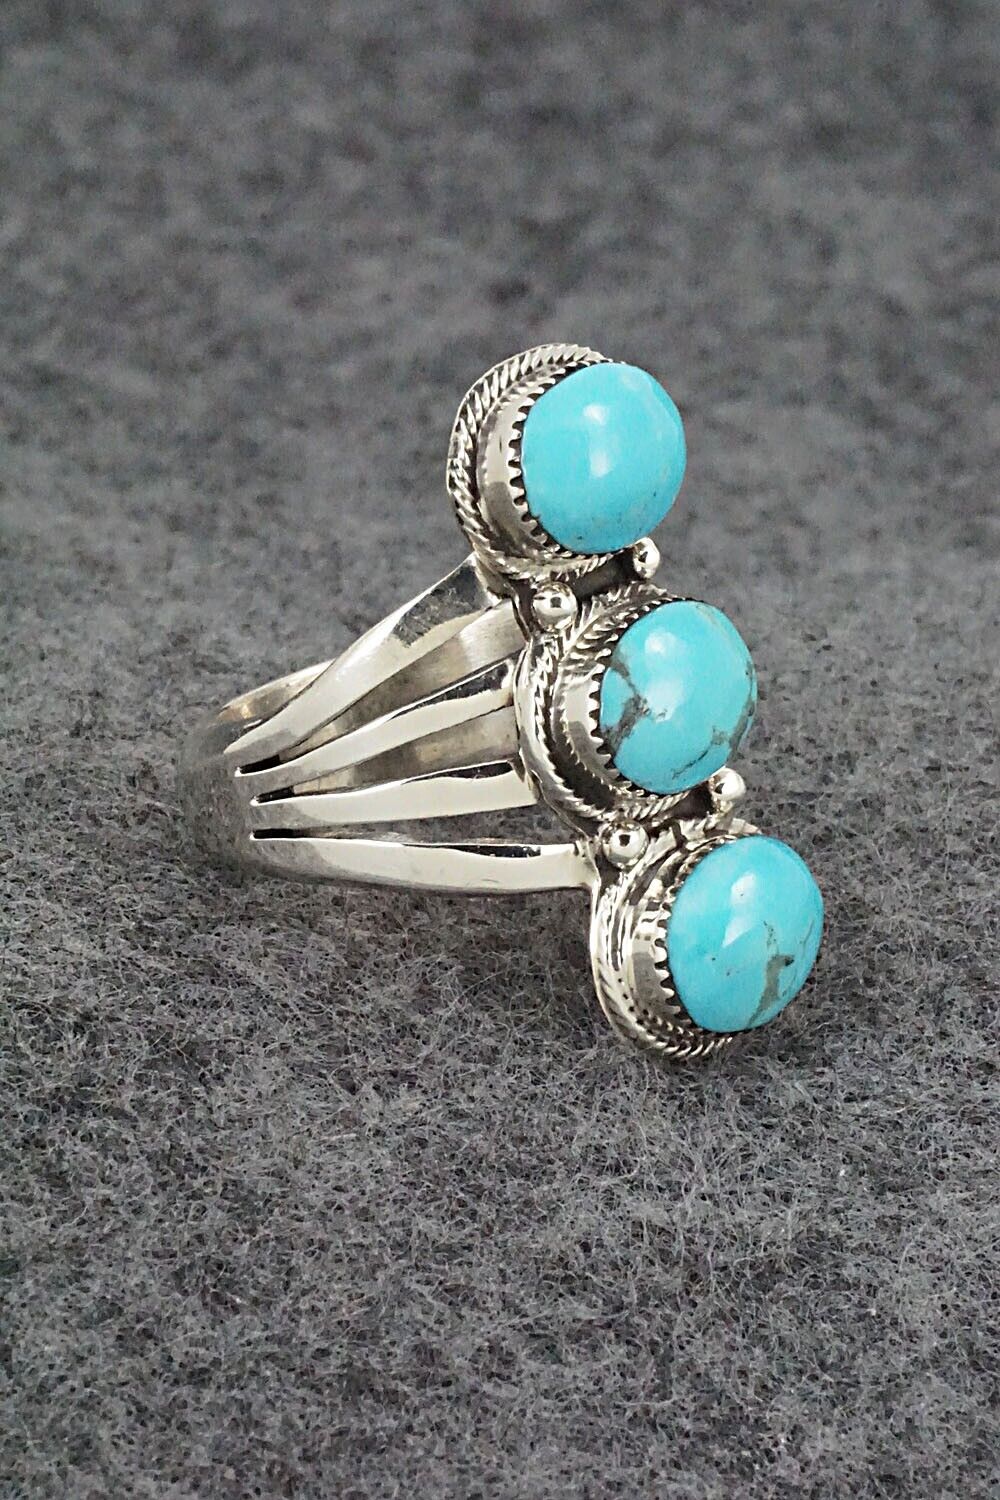 Turquoise & Sterling Silver Ring - Sheena Jack - Size 7.75